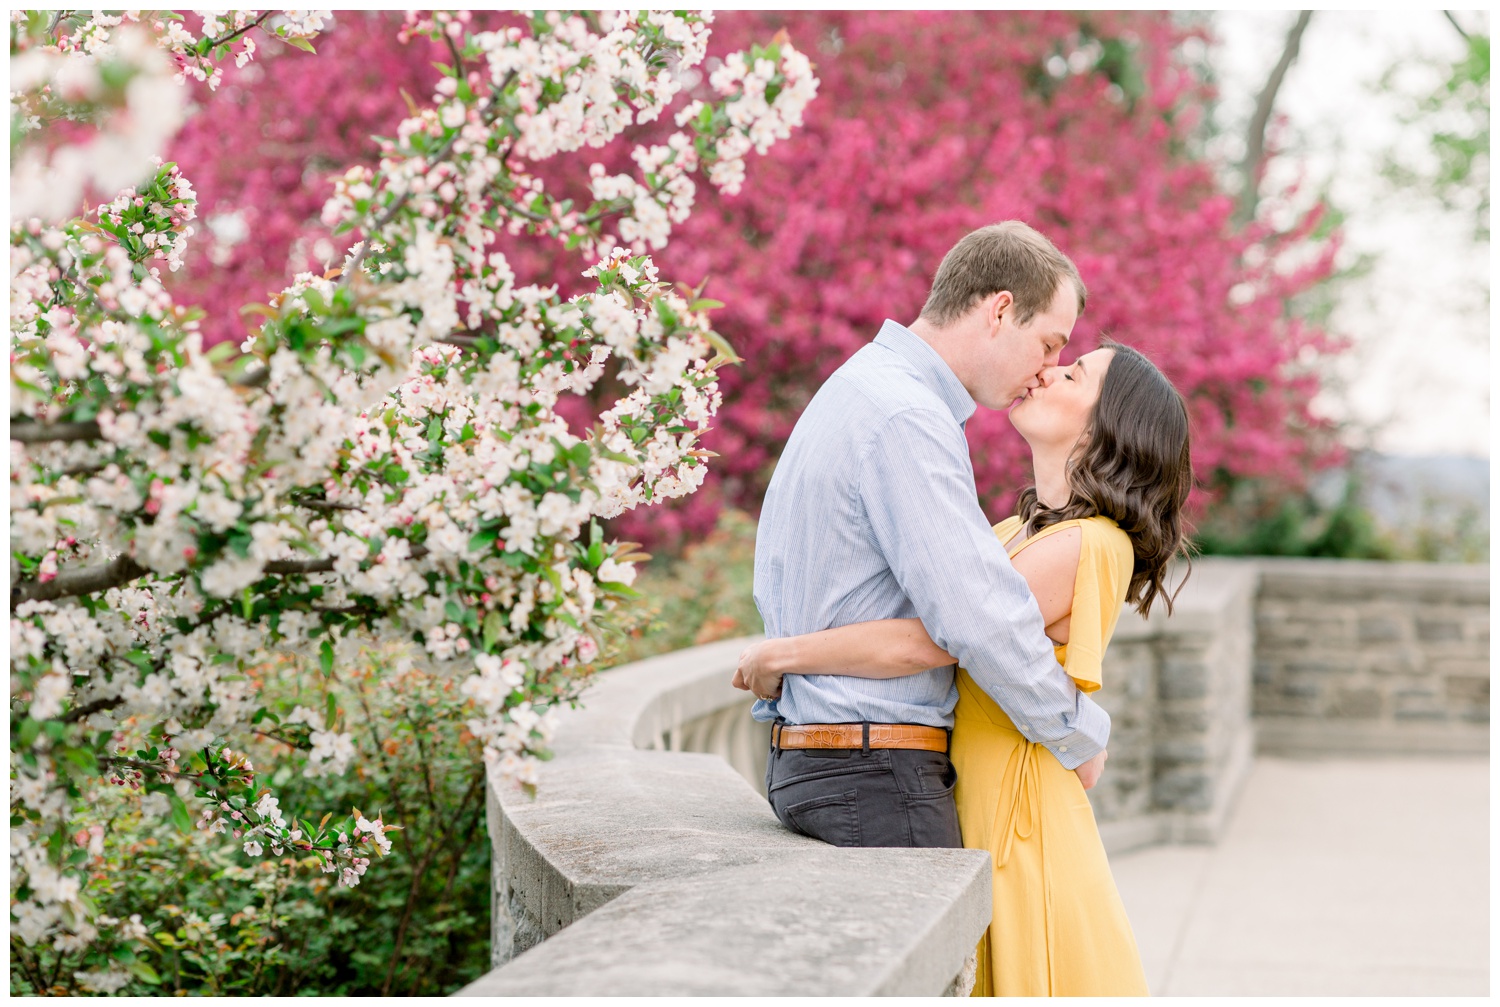 Spring Engagement with Blooms at Ault Park Cincinnati